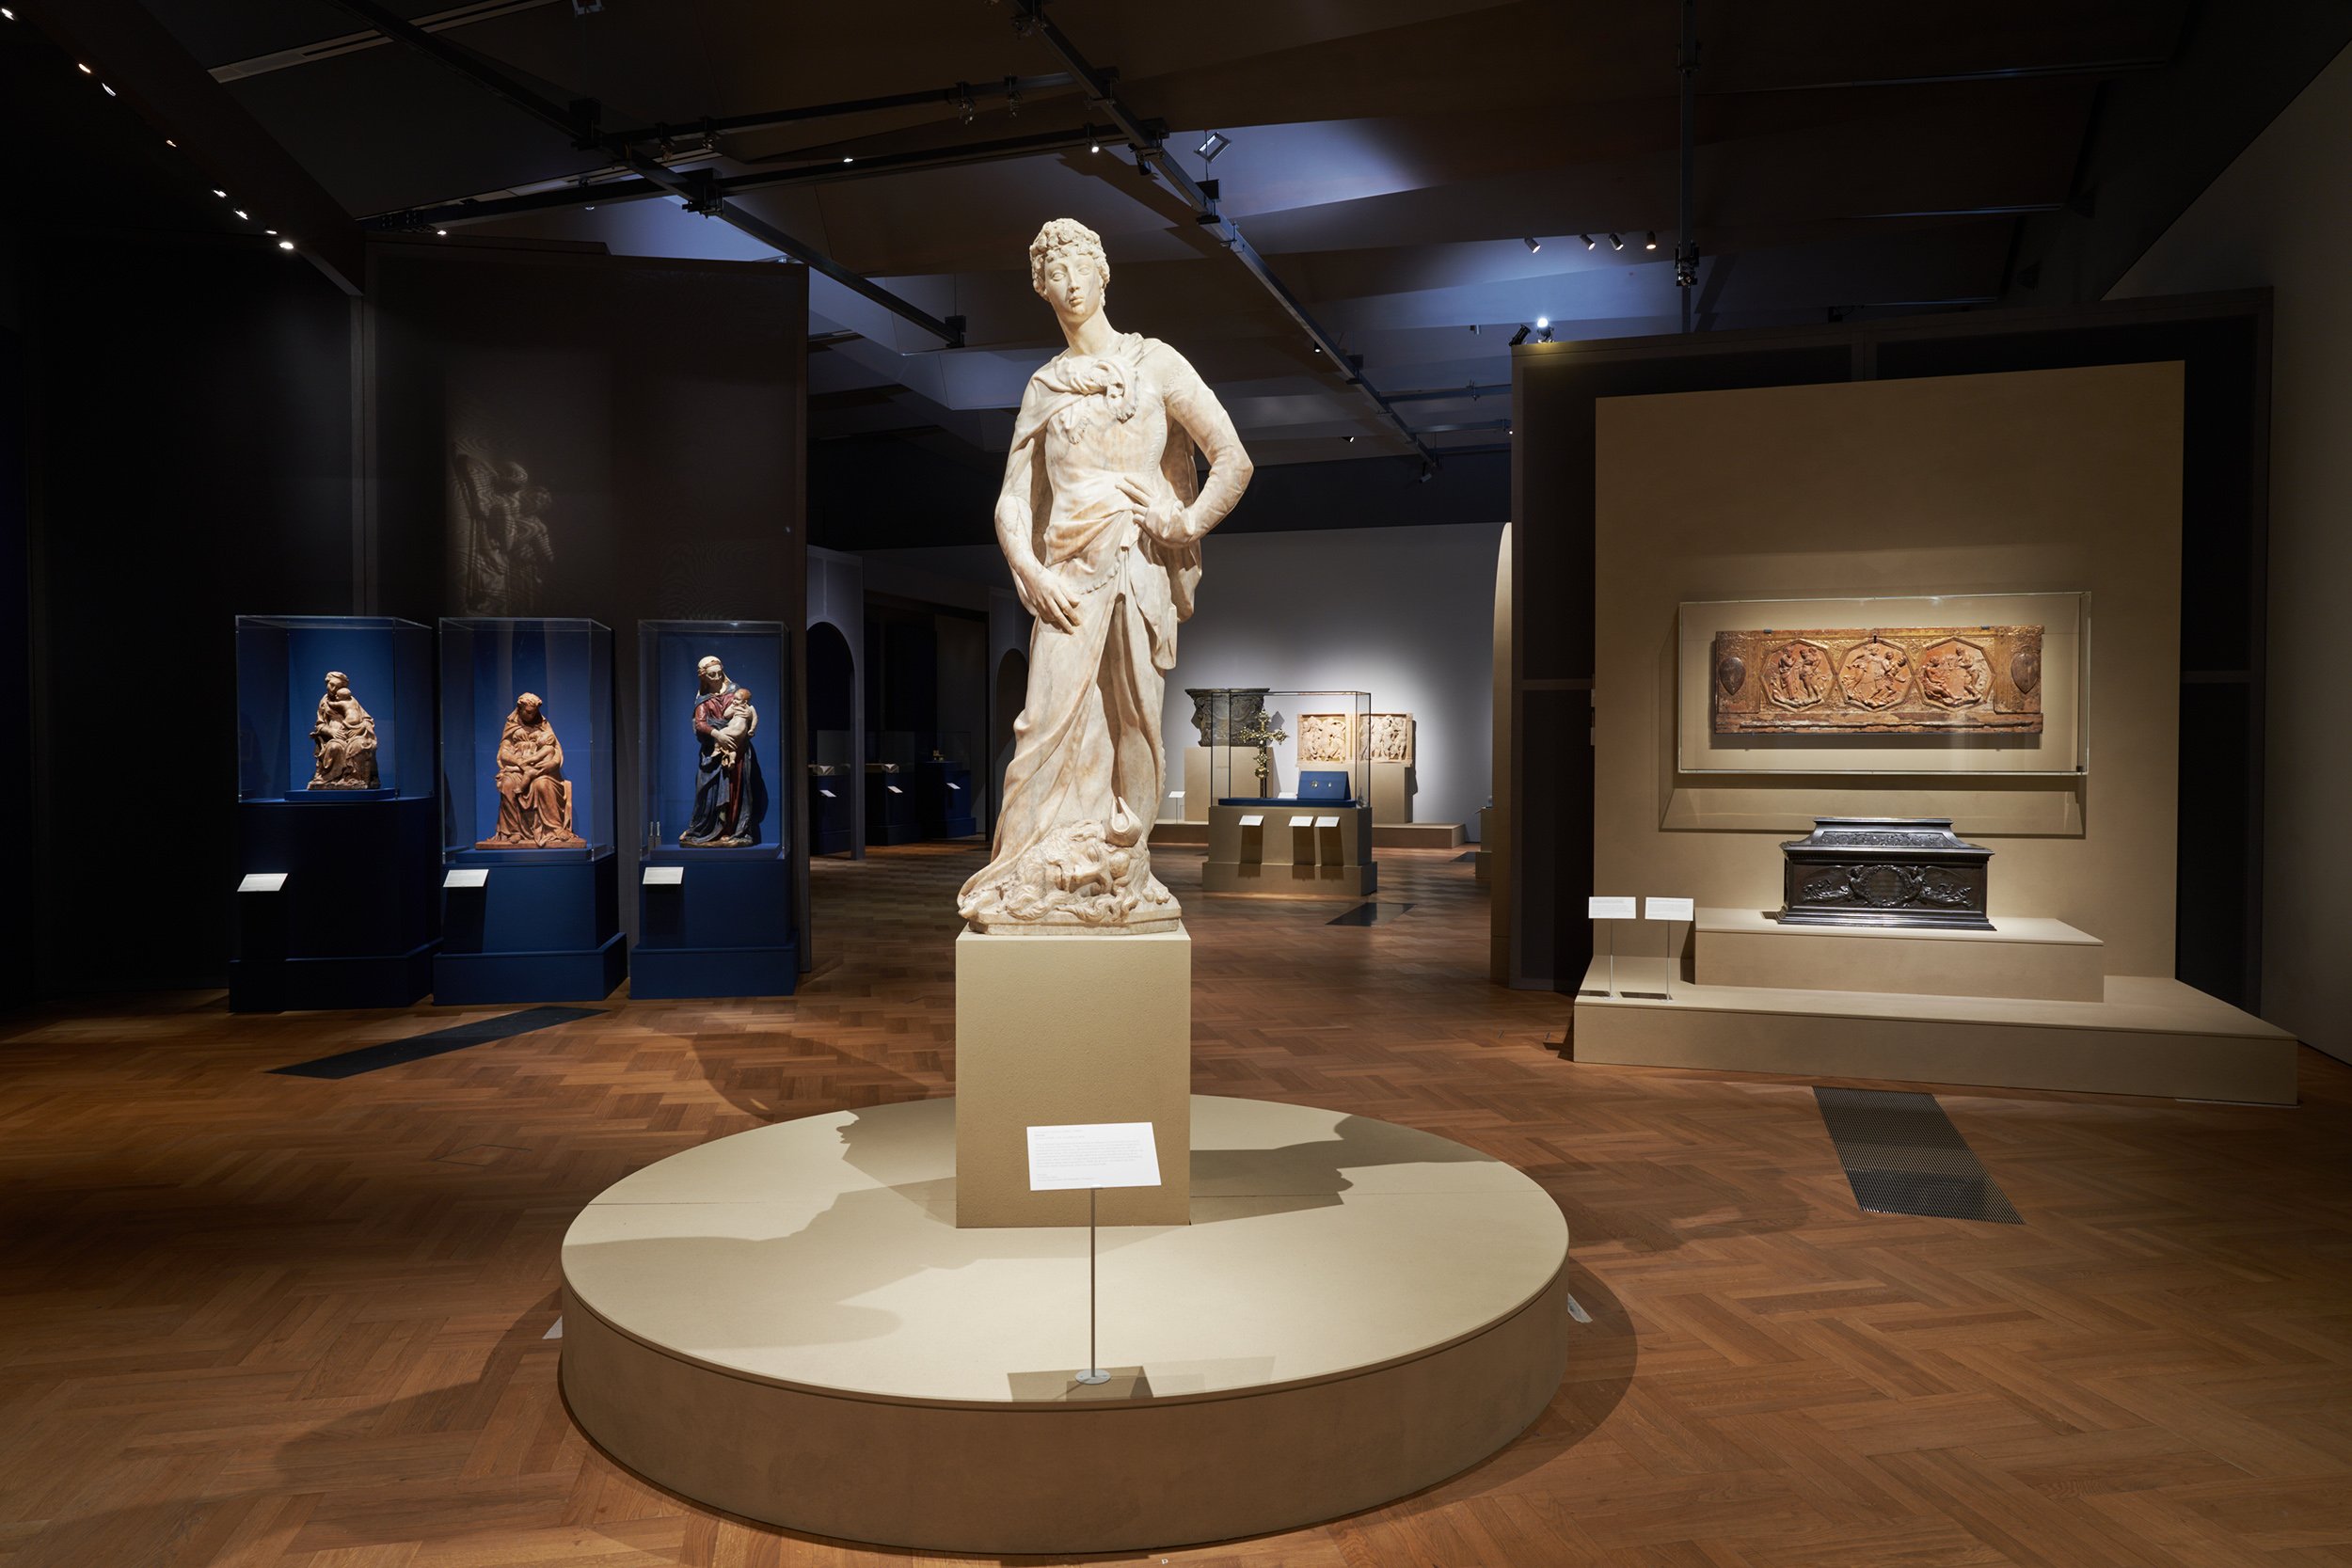 In Pictures: A Once-In-a-Lifetime Donatello Exhibition Surveys the  Renaissance Master's Revolutionary Sculptural Practice